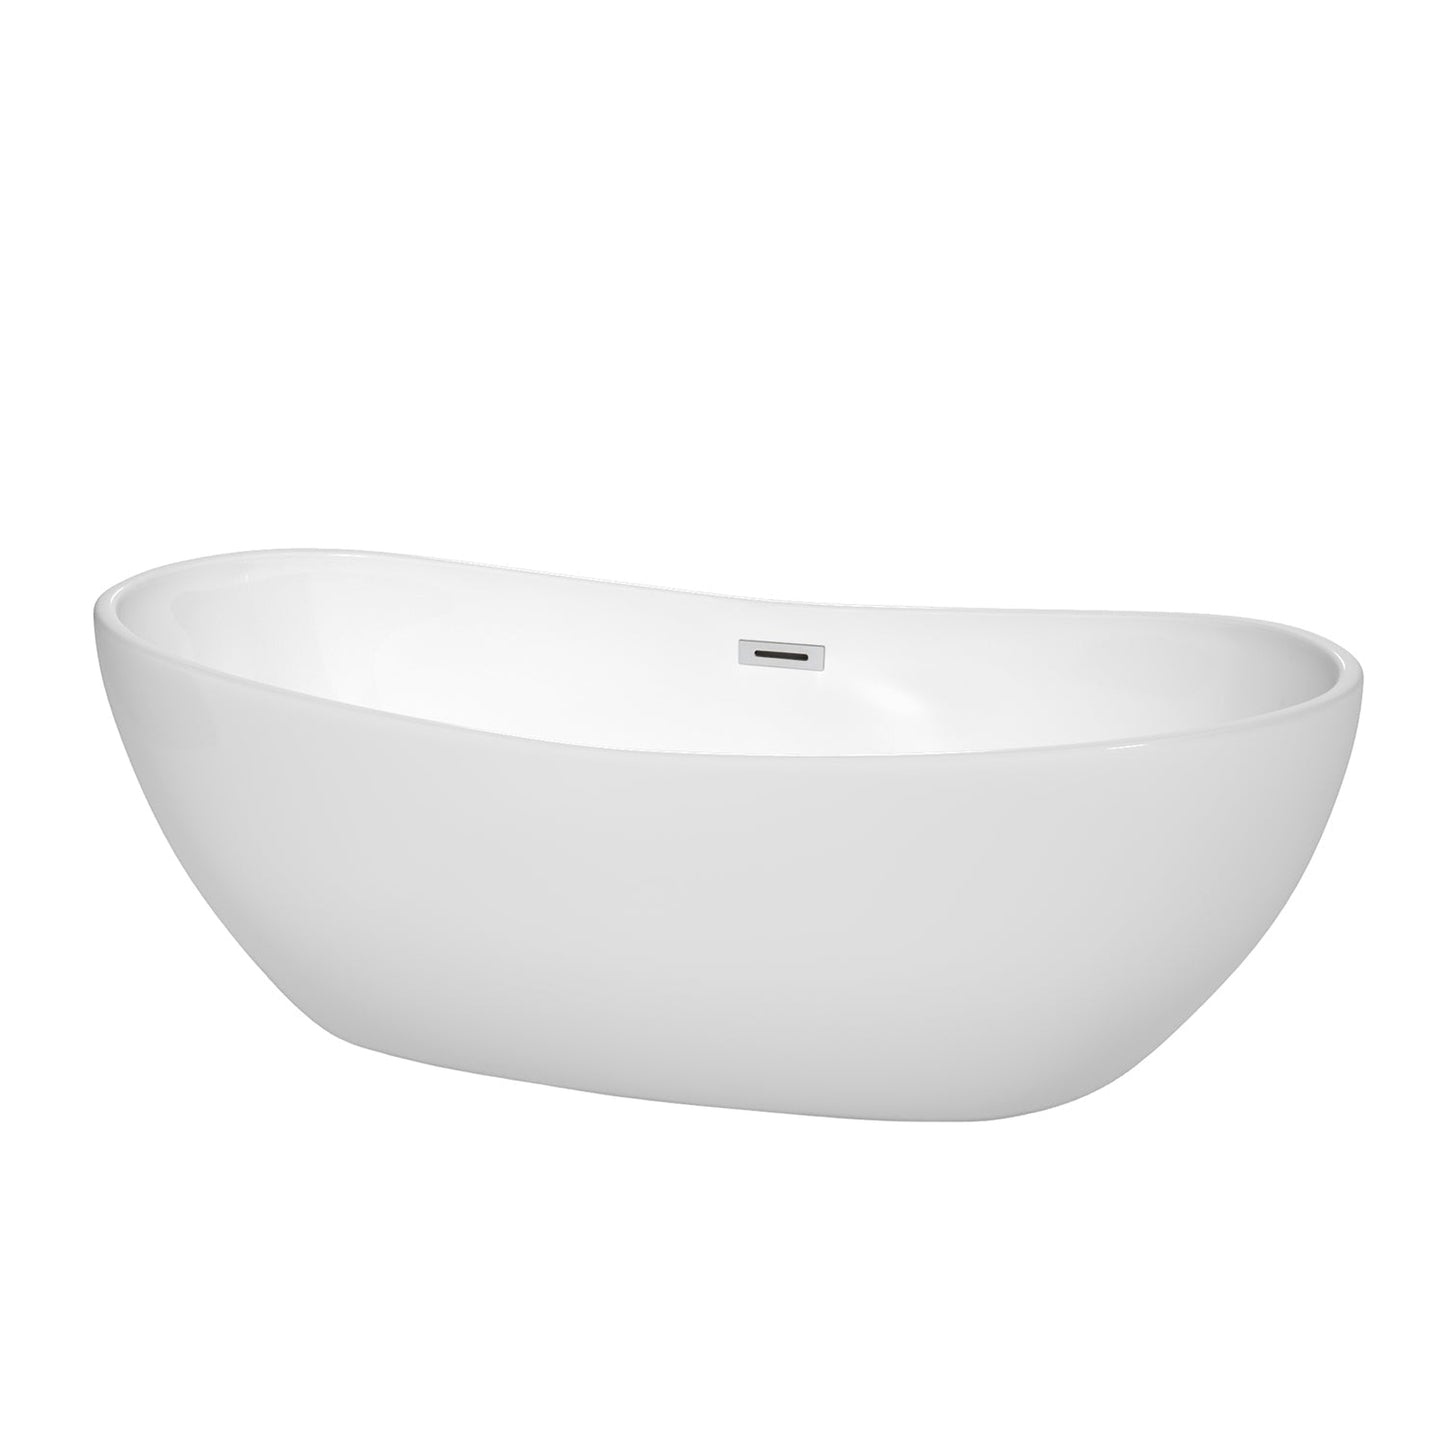 Wyndham Collection Rebecca 70" Freestanding Bathtub in White With Polished Chrome Drain and Overflow Trim